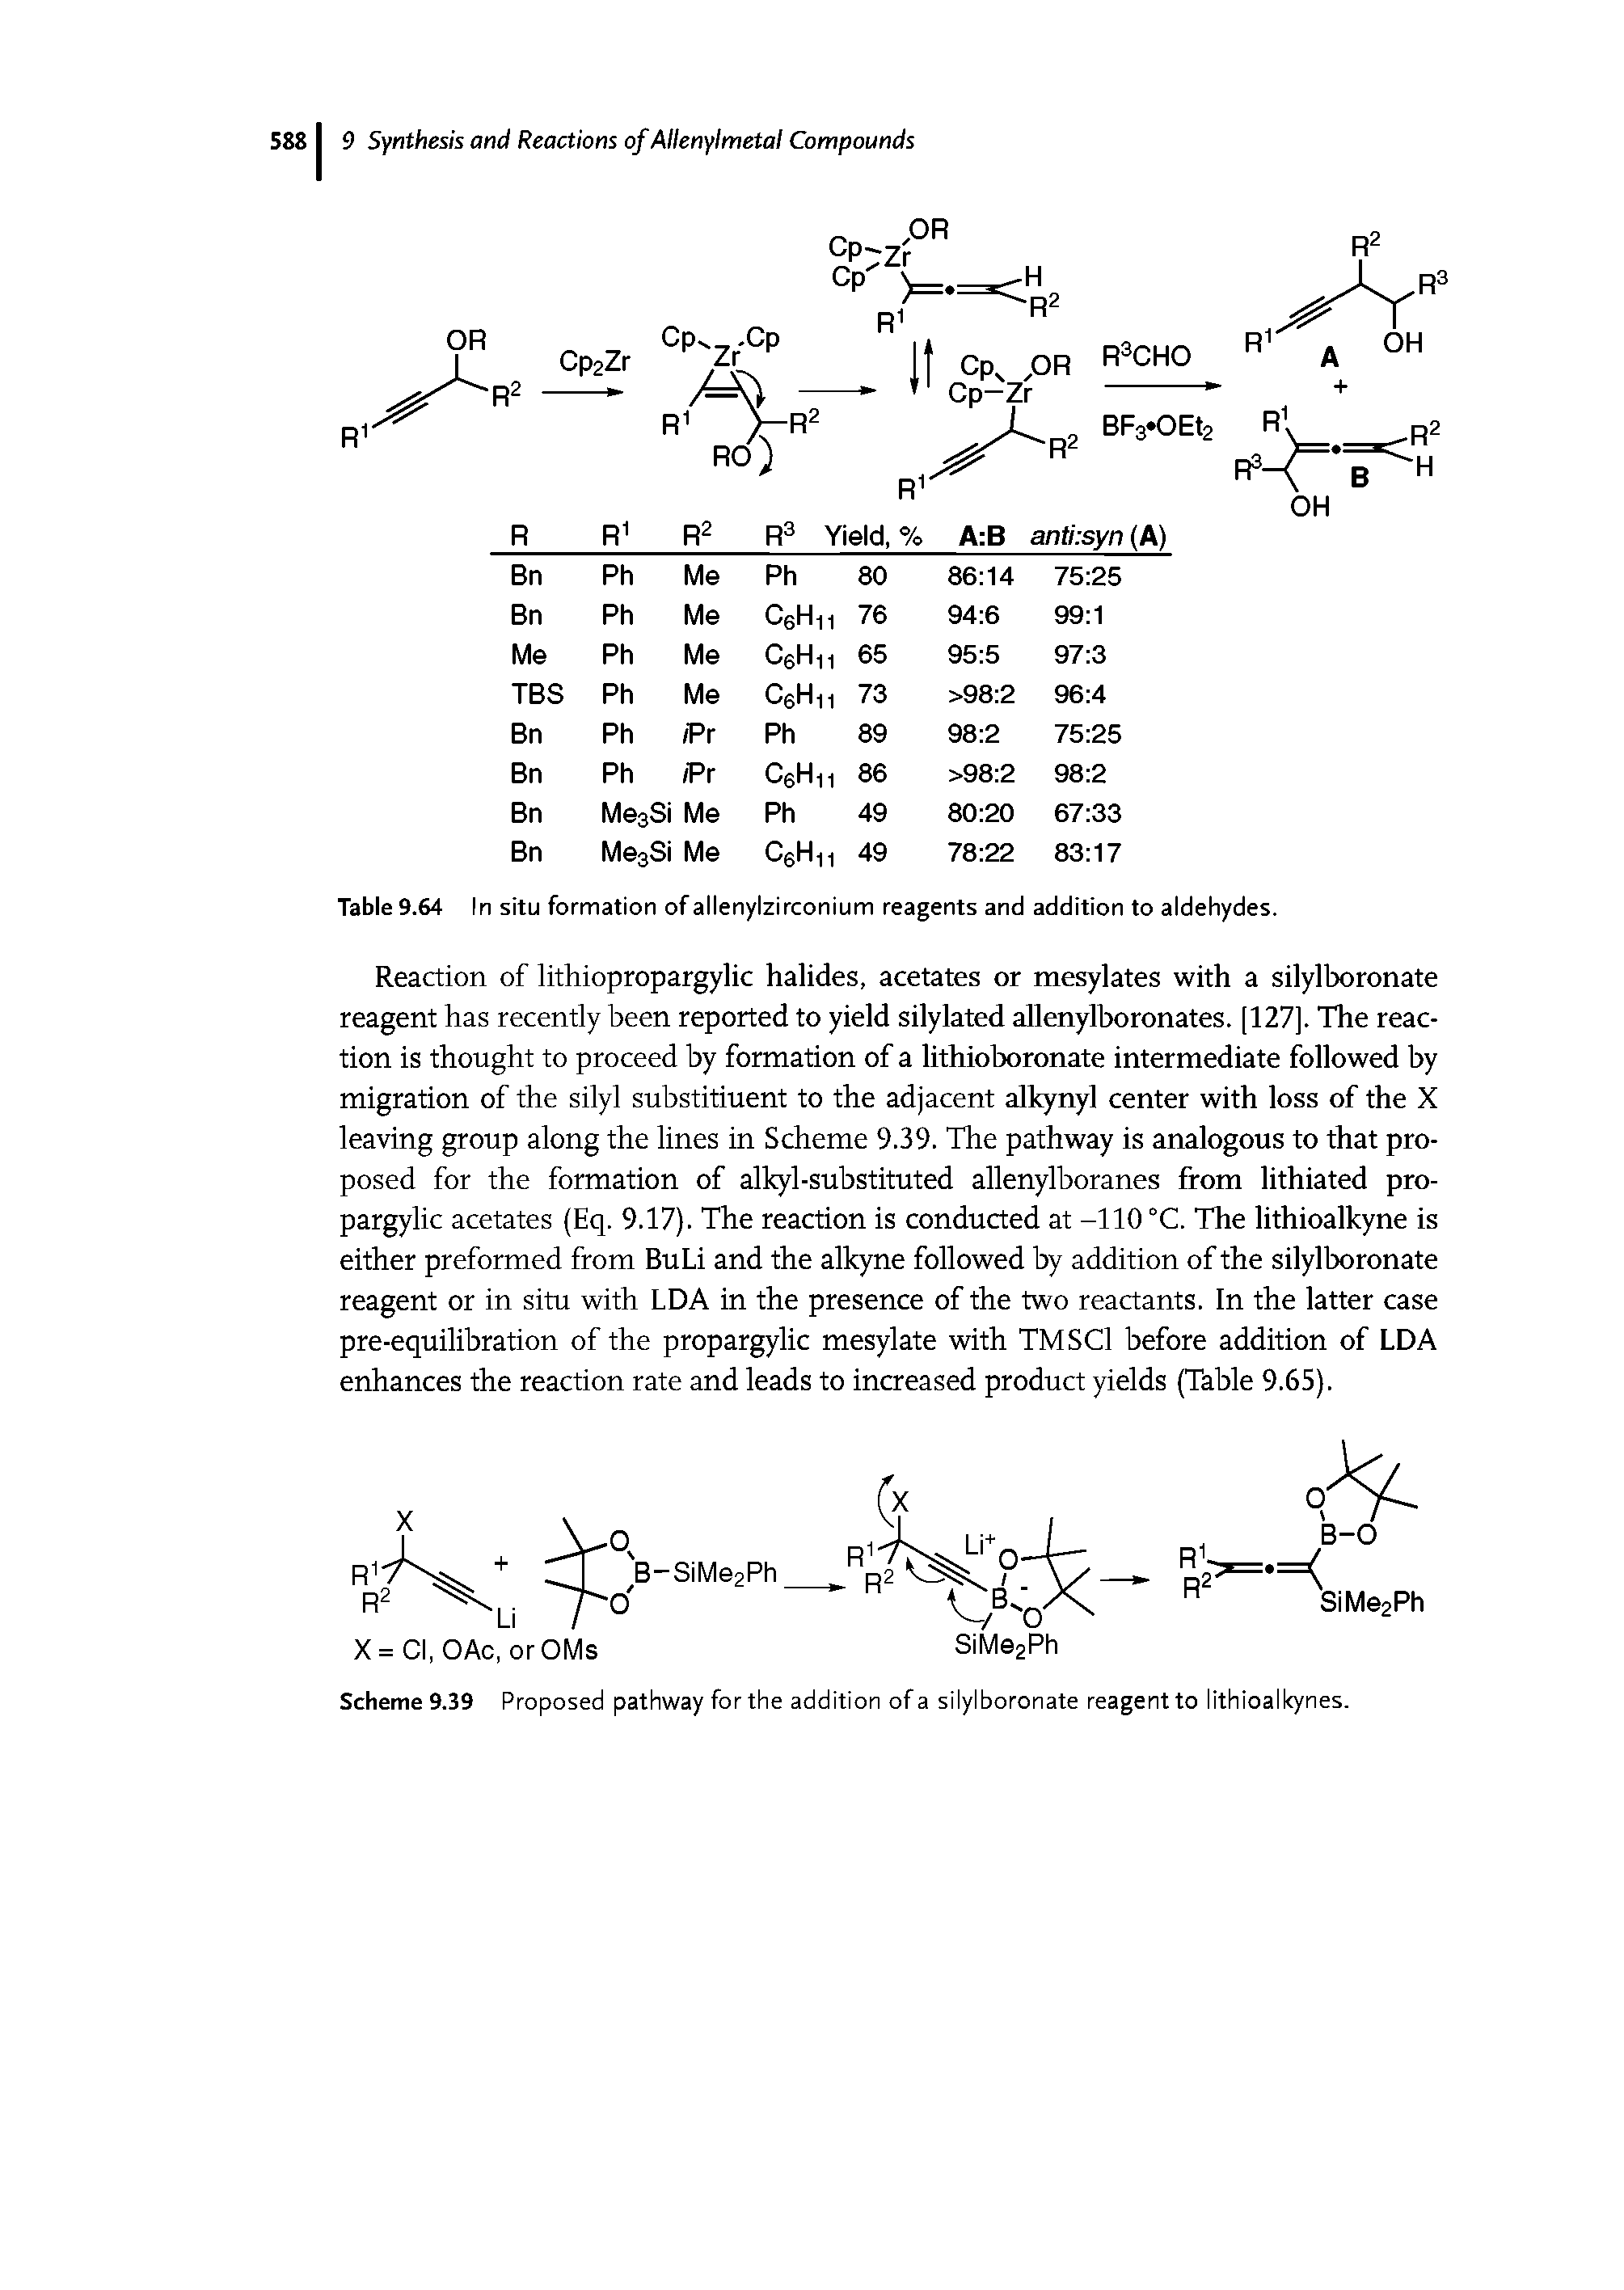 Table 9.64 In situ formation of allenylzirconium reagents and addition to aldehydes.